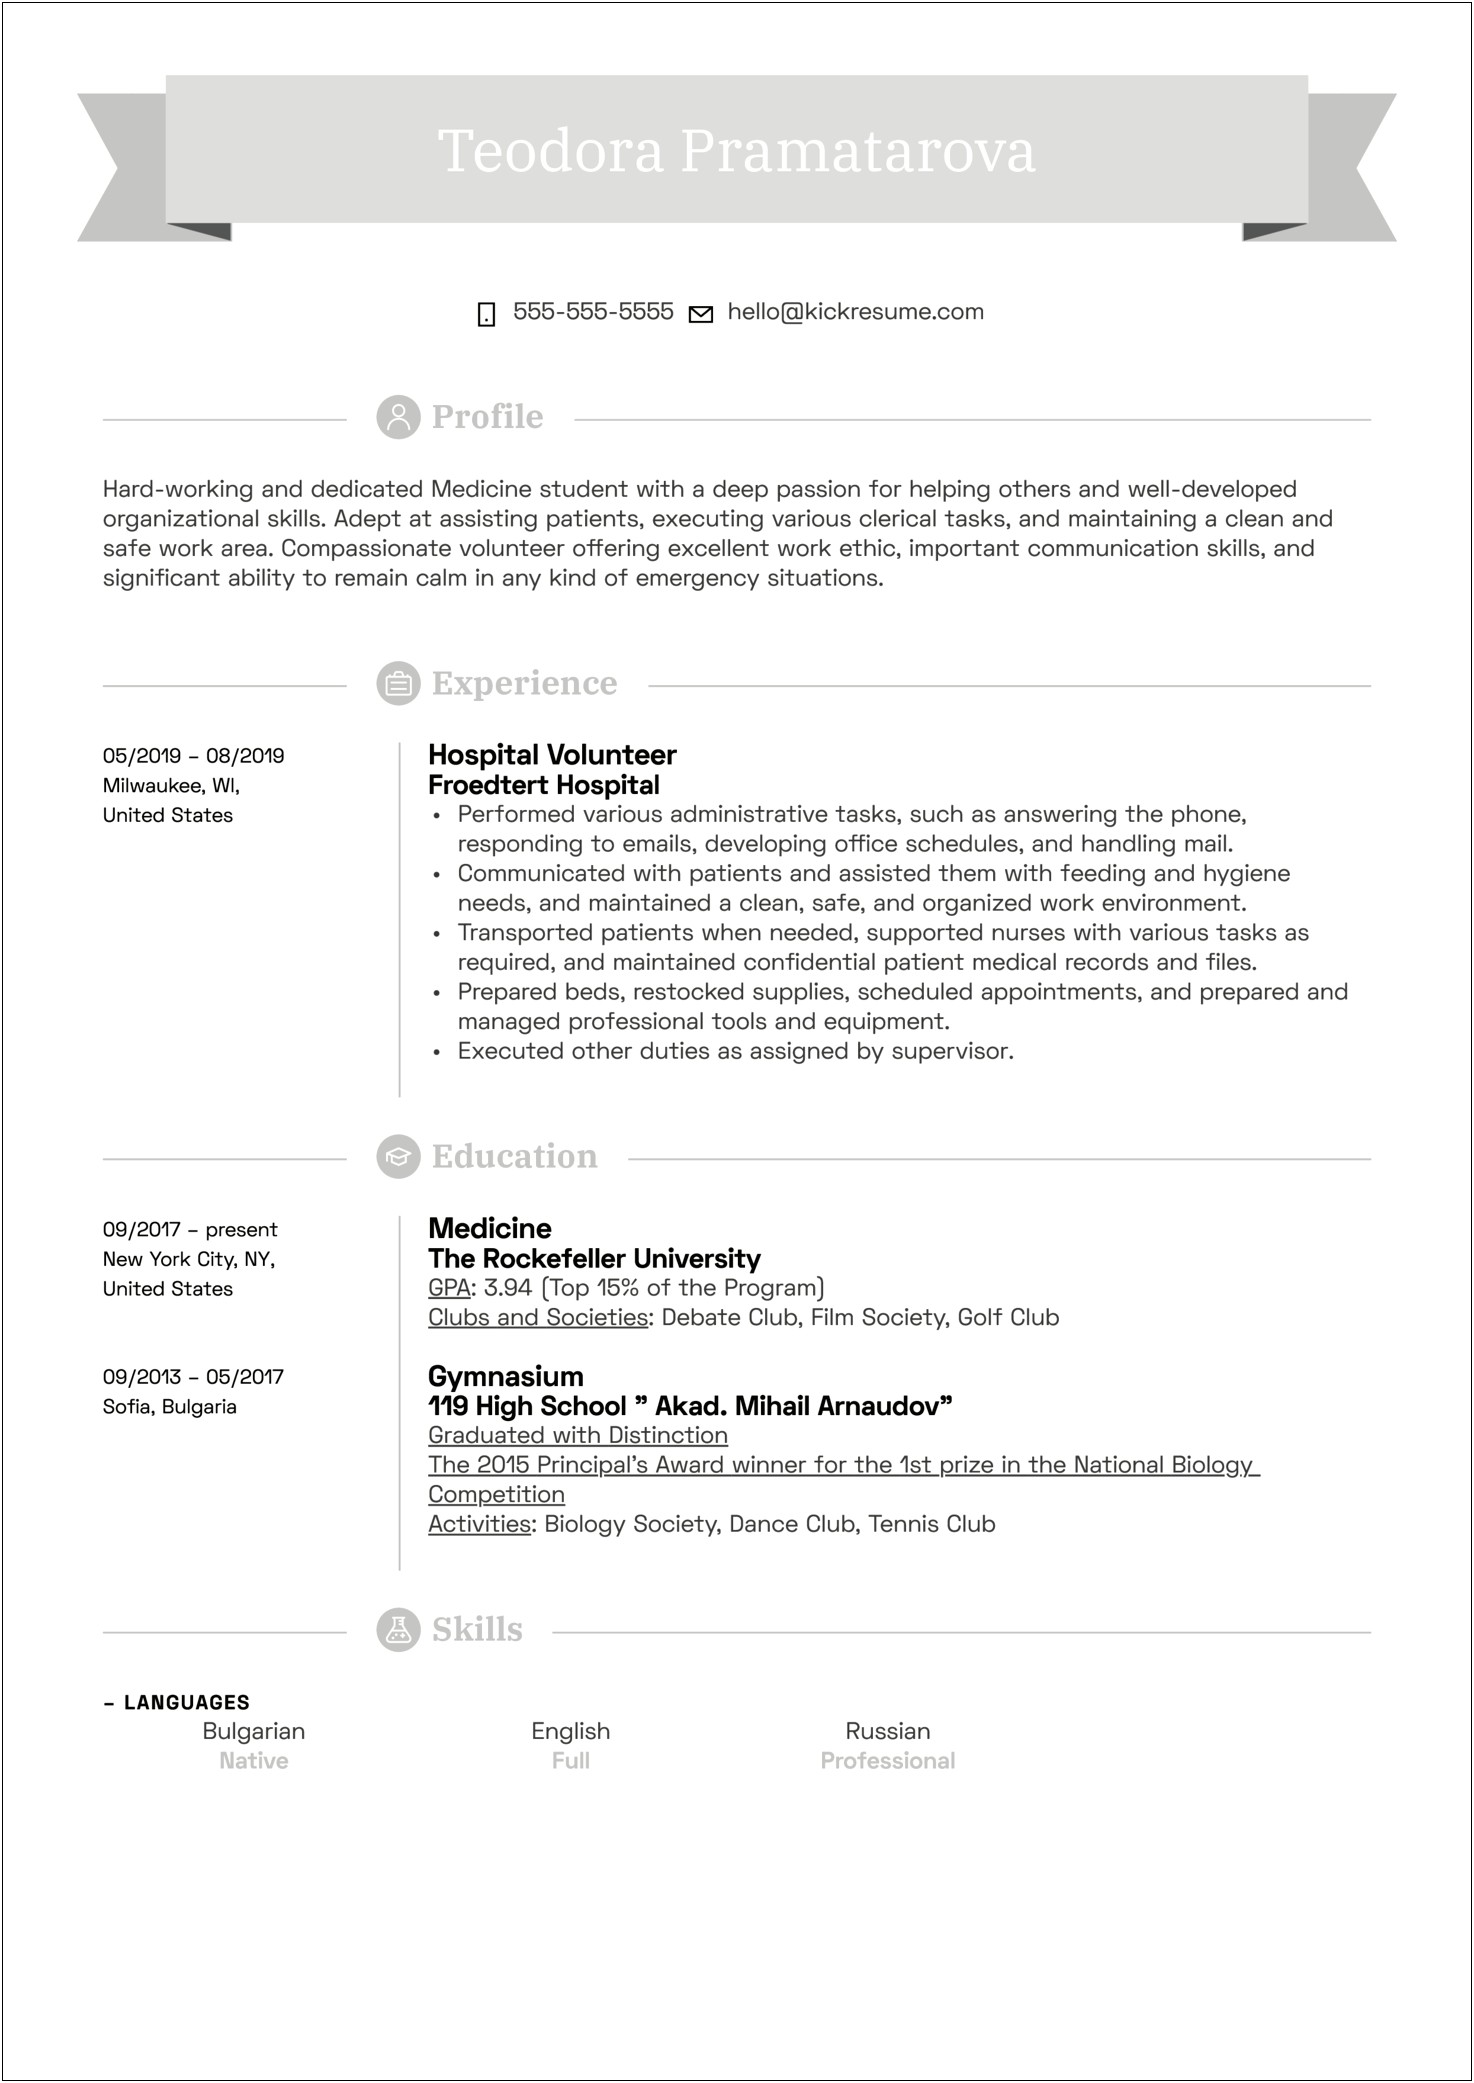 Example Resume For Highschool Veterinary Assistant